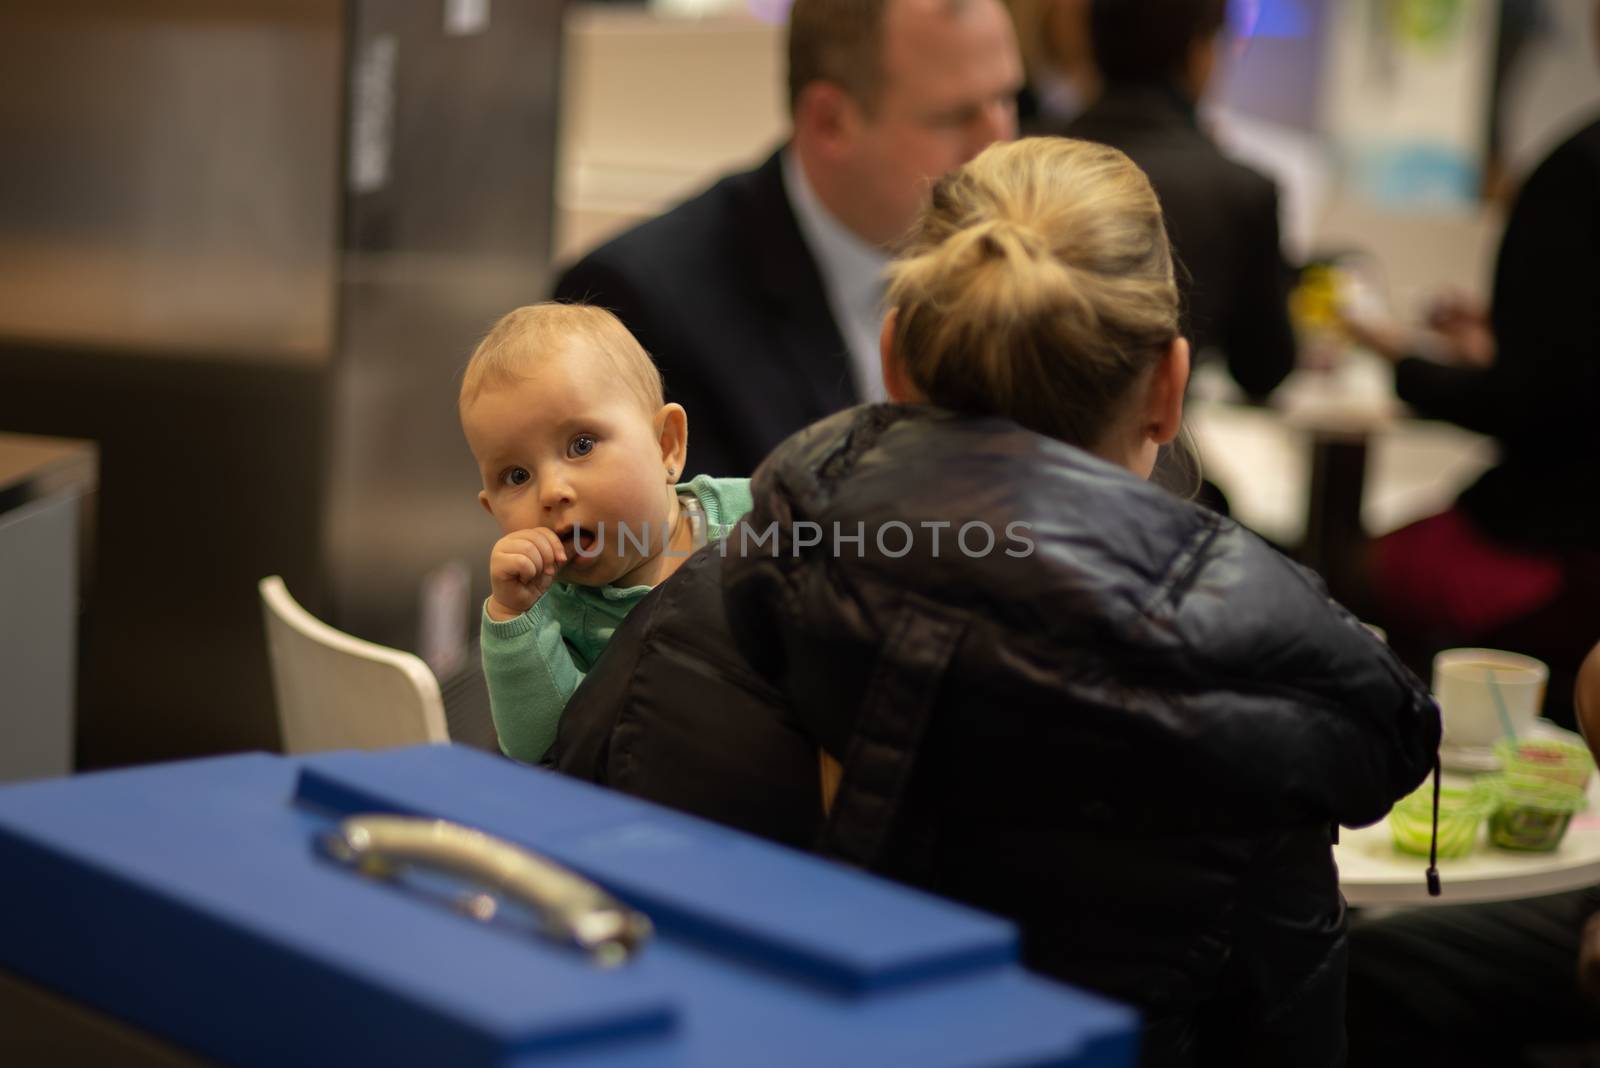 03/04/2018. Brno, Czech Republic. Beautiful small child looking at he camera and having fun with her mother while attending an event at the convention trade center in Brno. BVV Brno Exhibition by gonzalobell